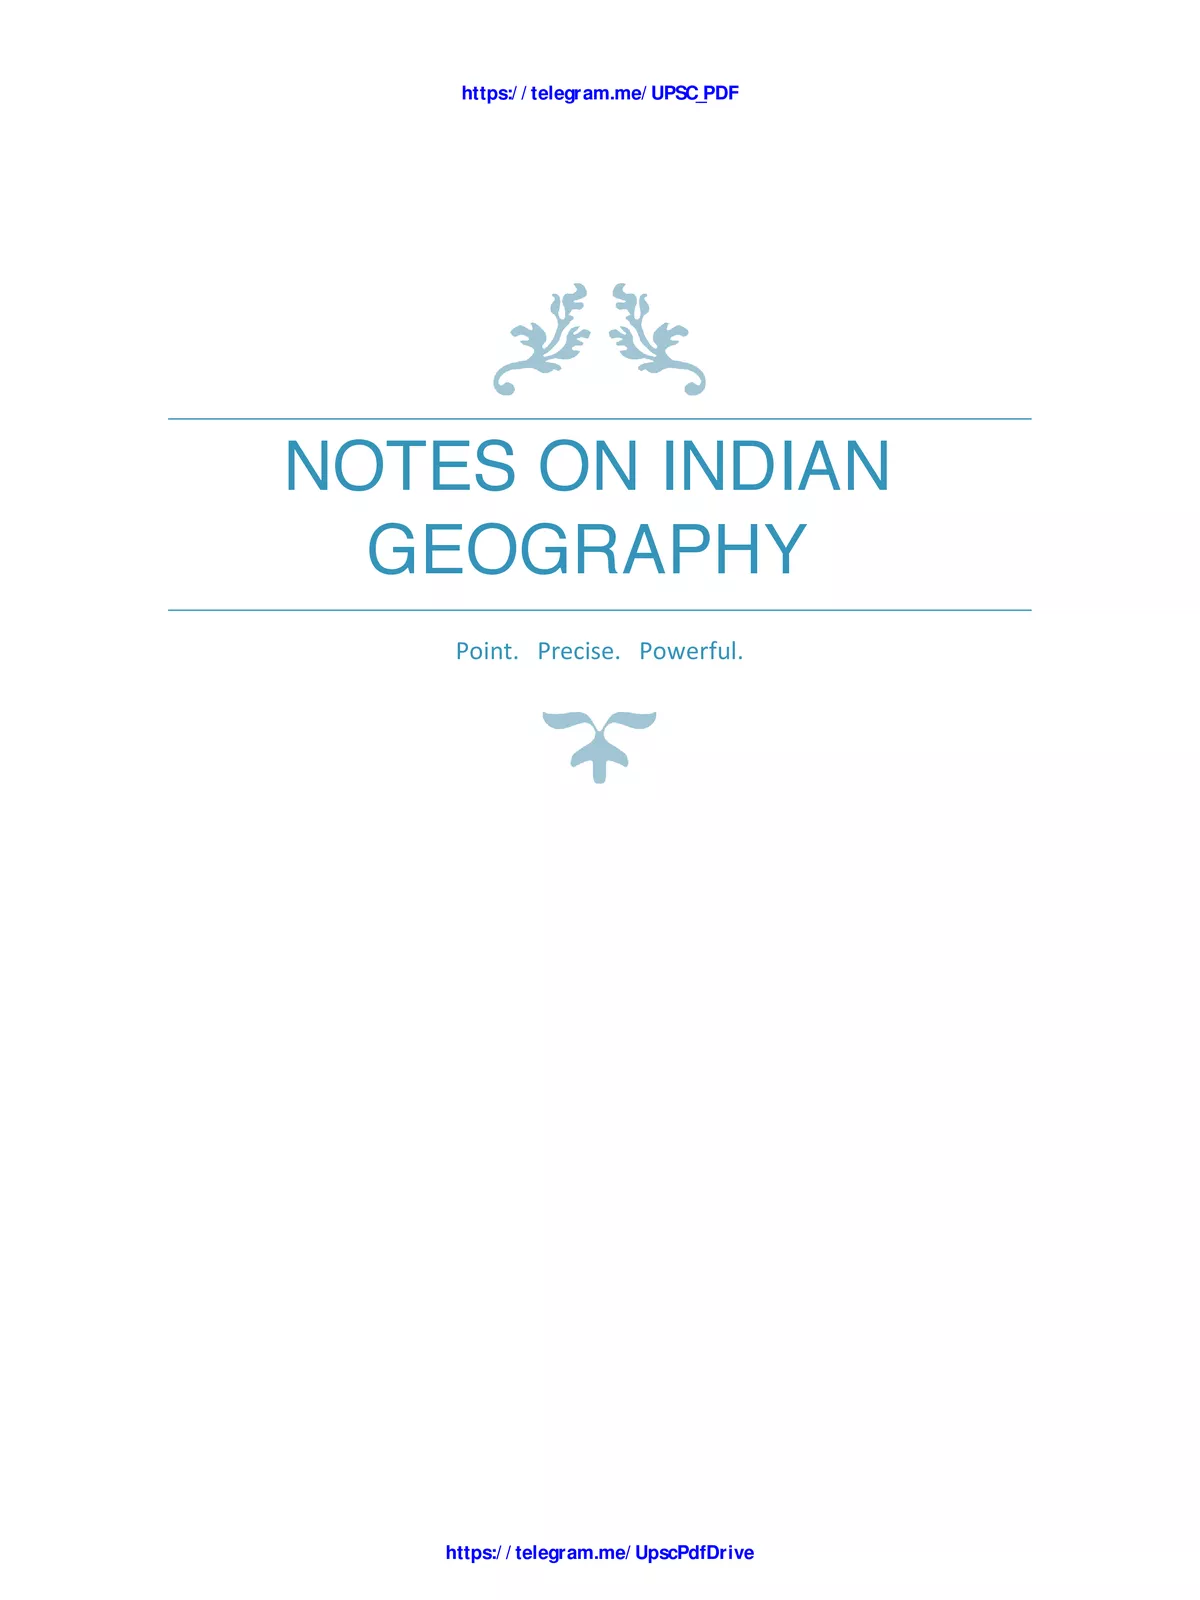 Indian Geography Notes